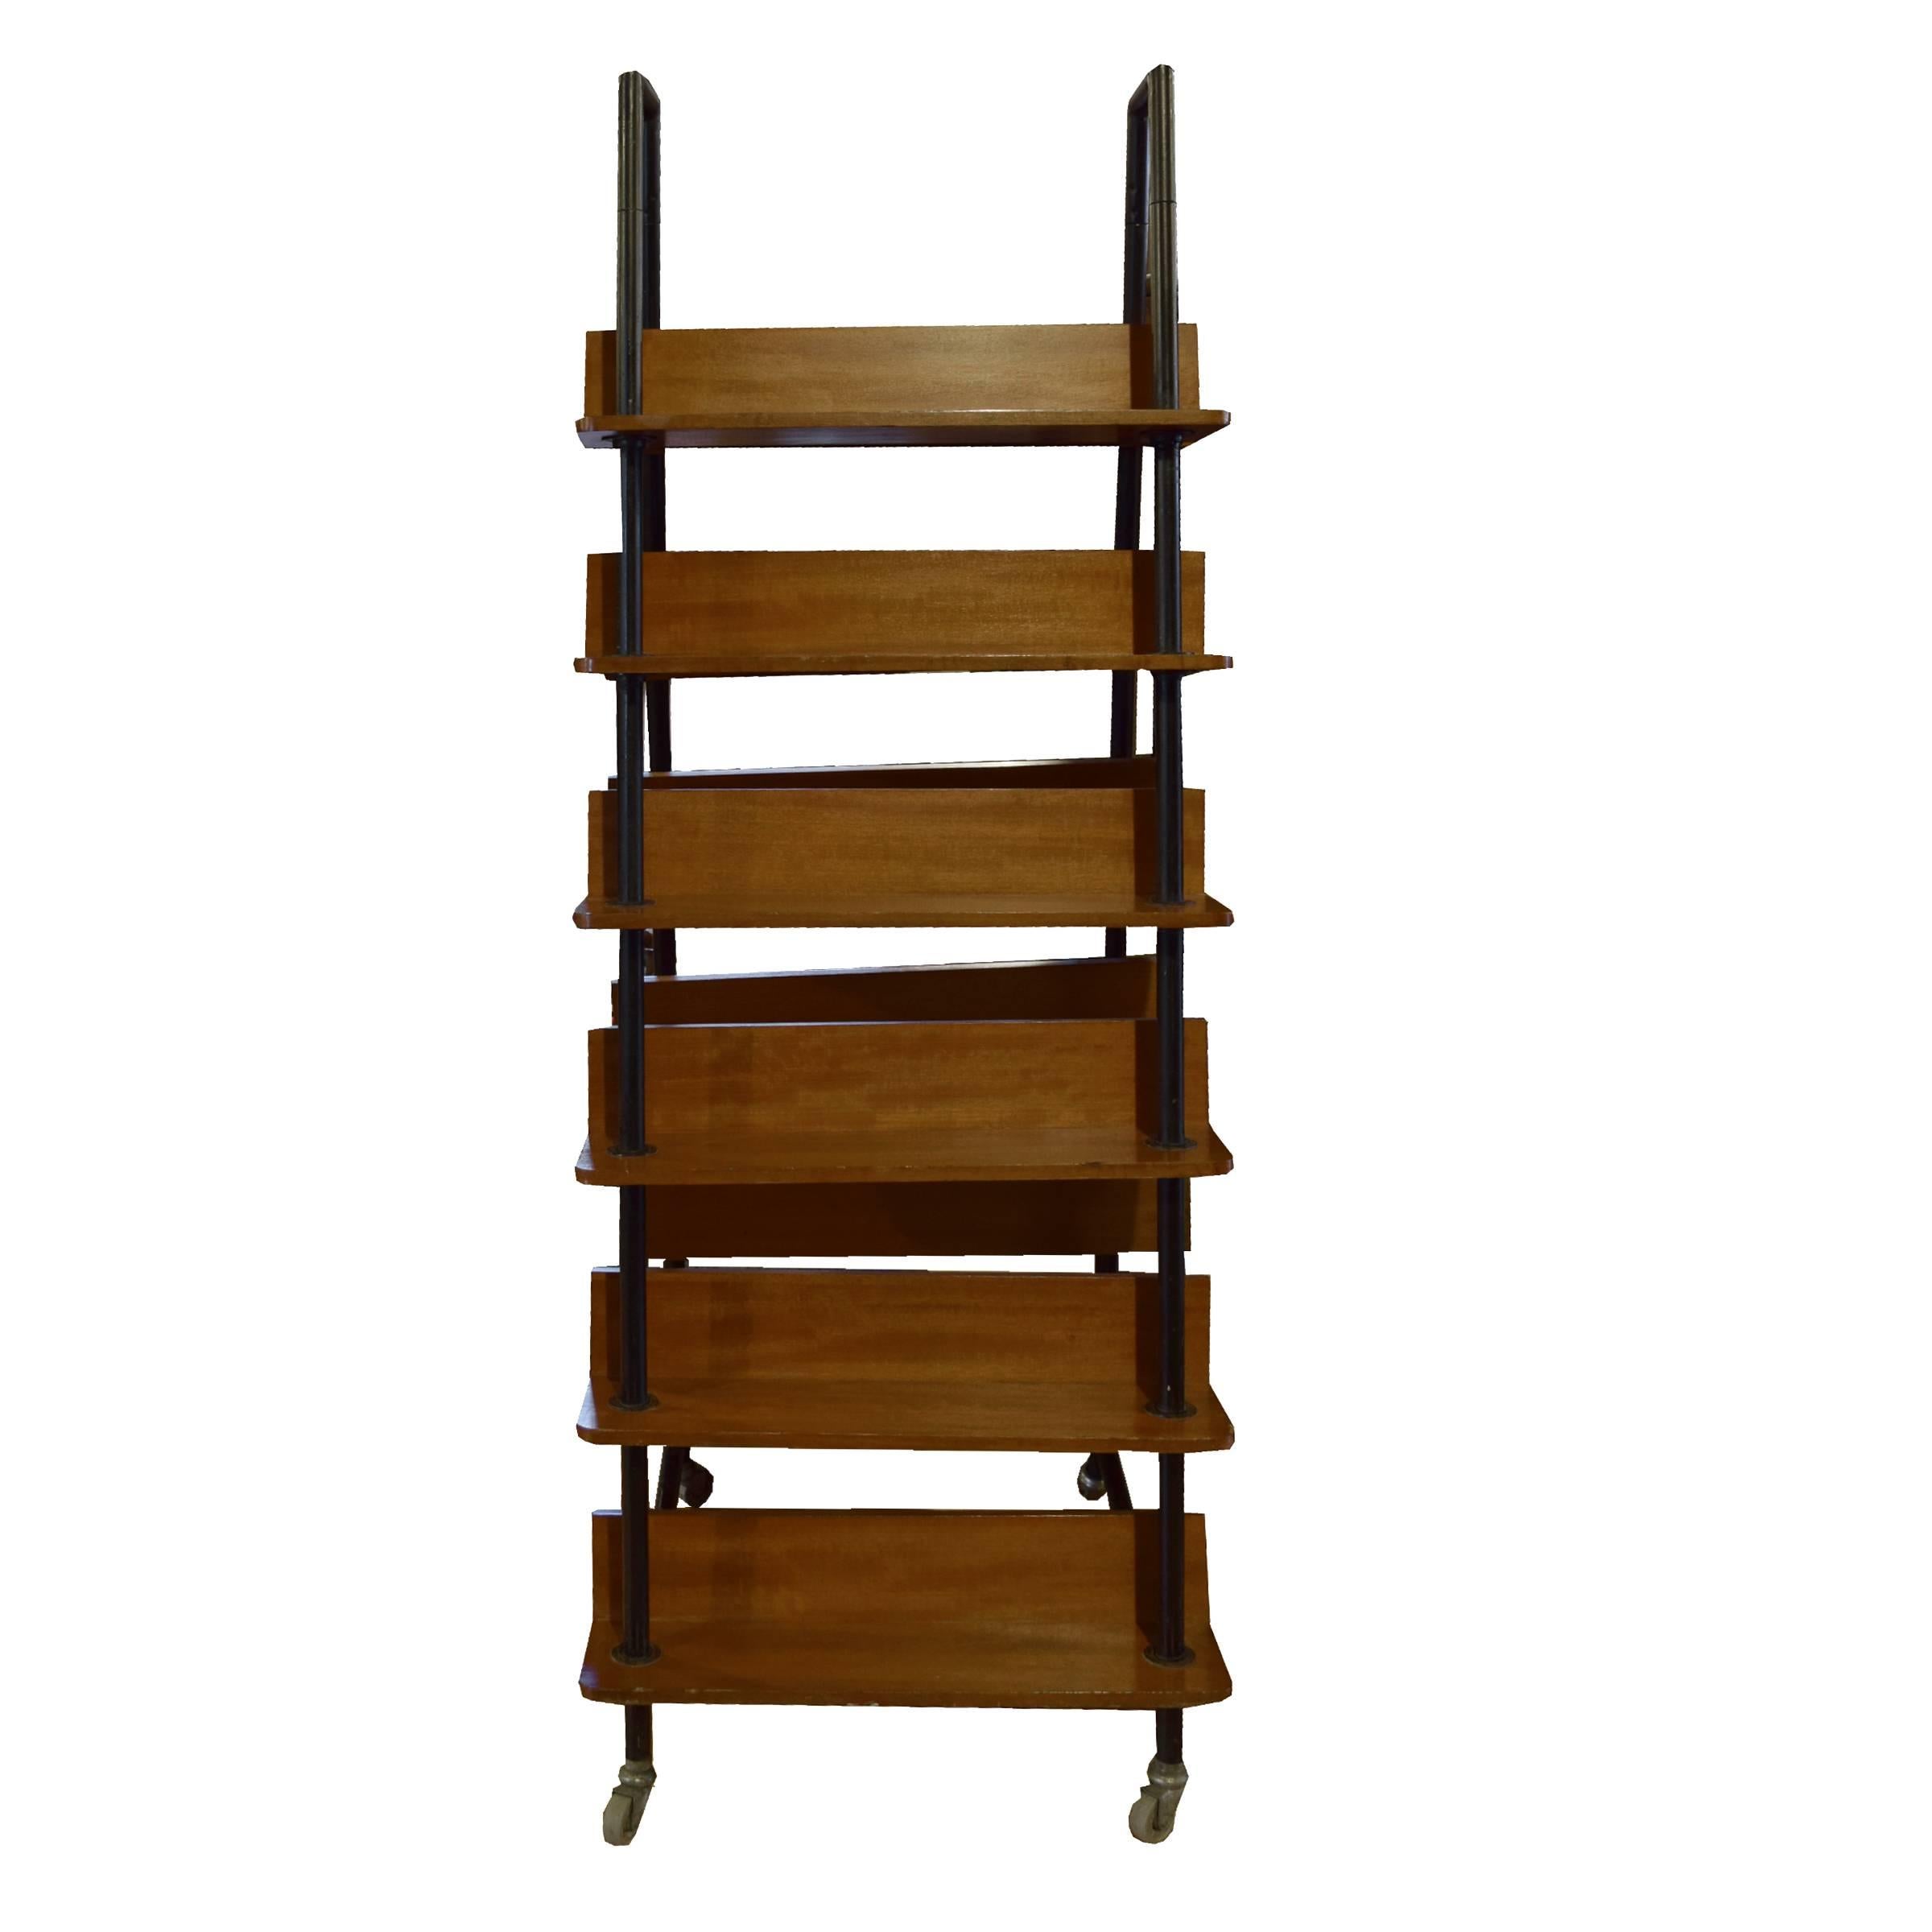 A French midcentury double-sided freestanding bookshelf on casters, with 12 shelves on a metal frame.